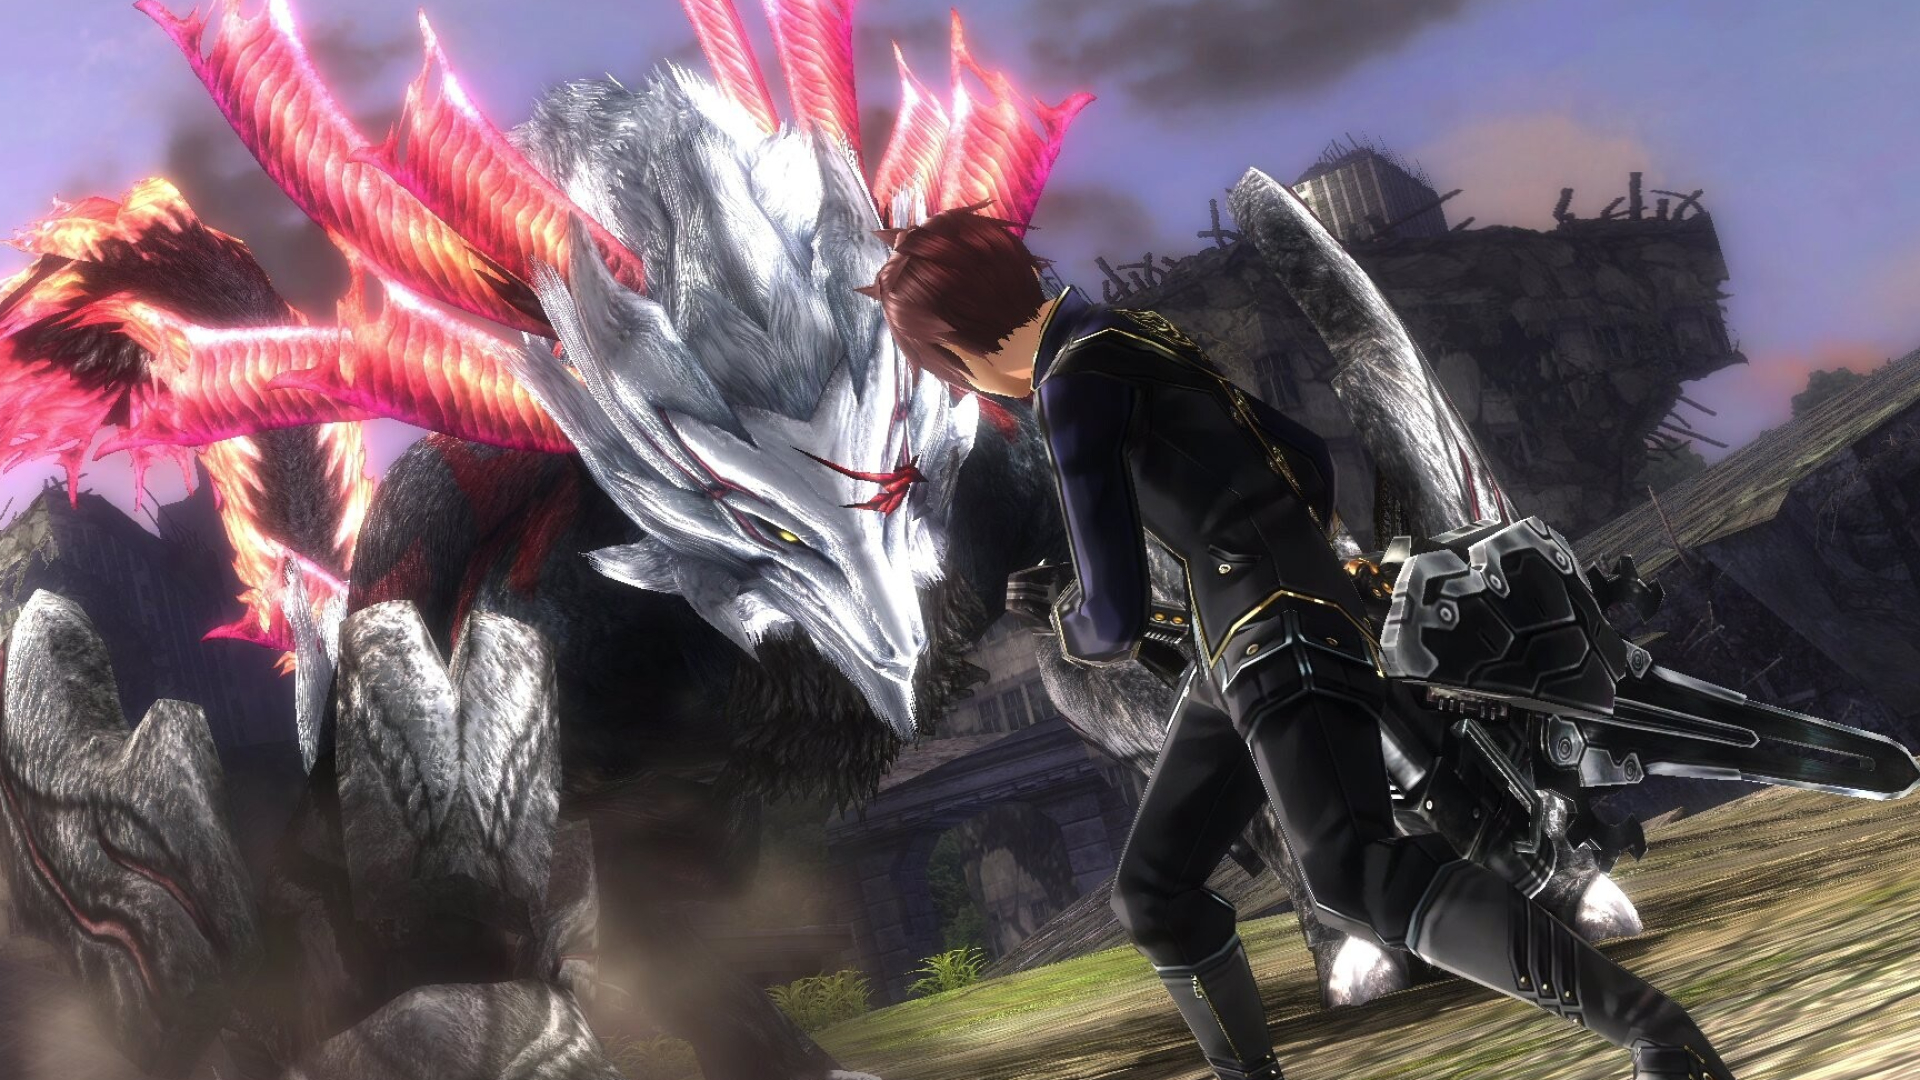 God Eater (Game): Rage Burst, Marduk, A wolf-like Aragami which resembles the Garm and is one of the new invasive species. 1920x1080 Full HD Wallpaper.